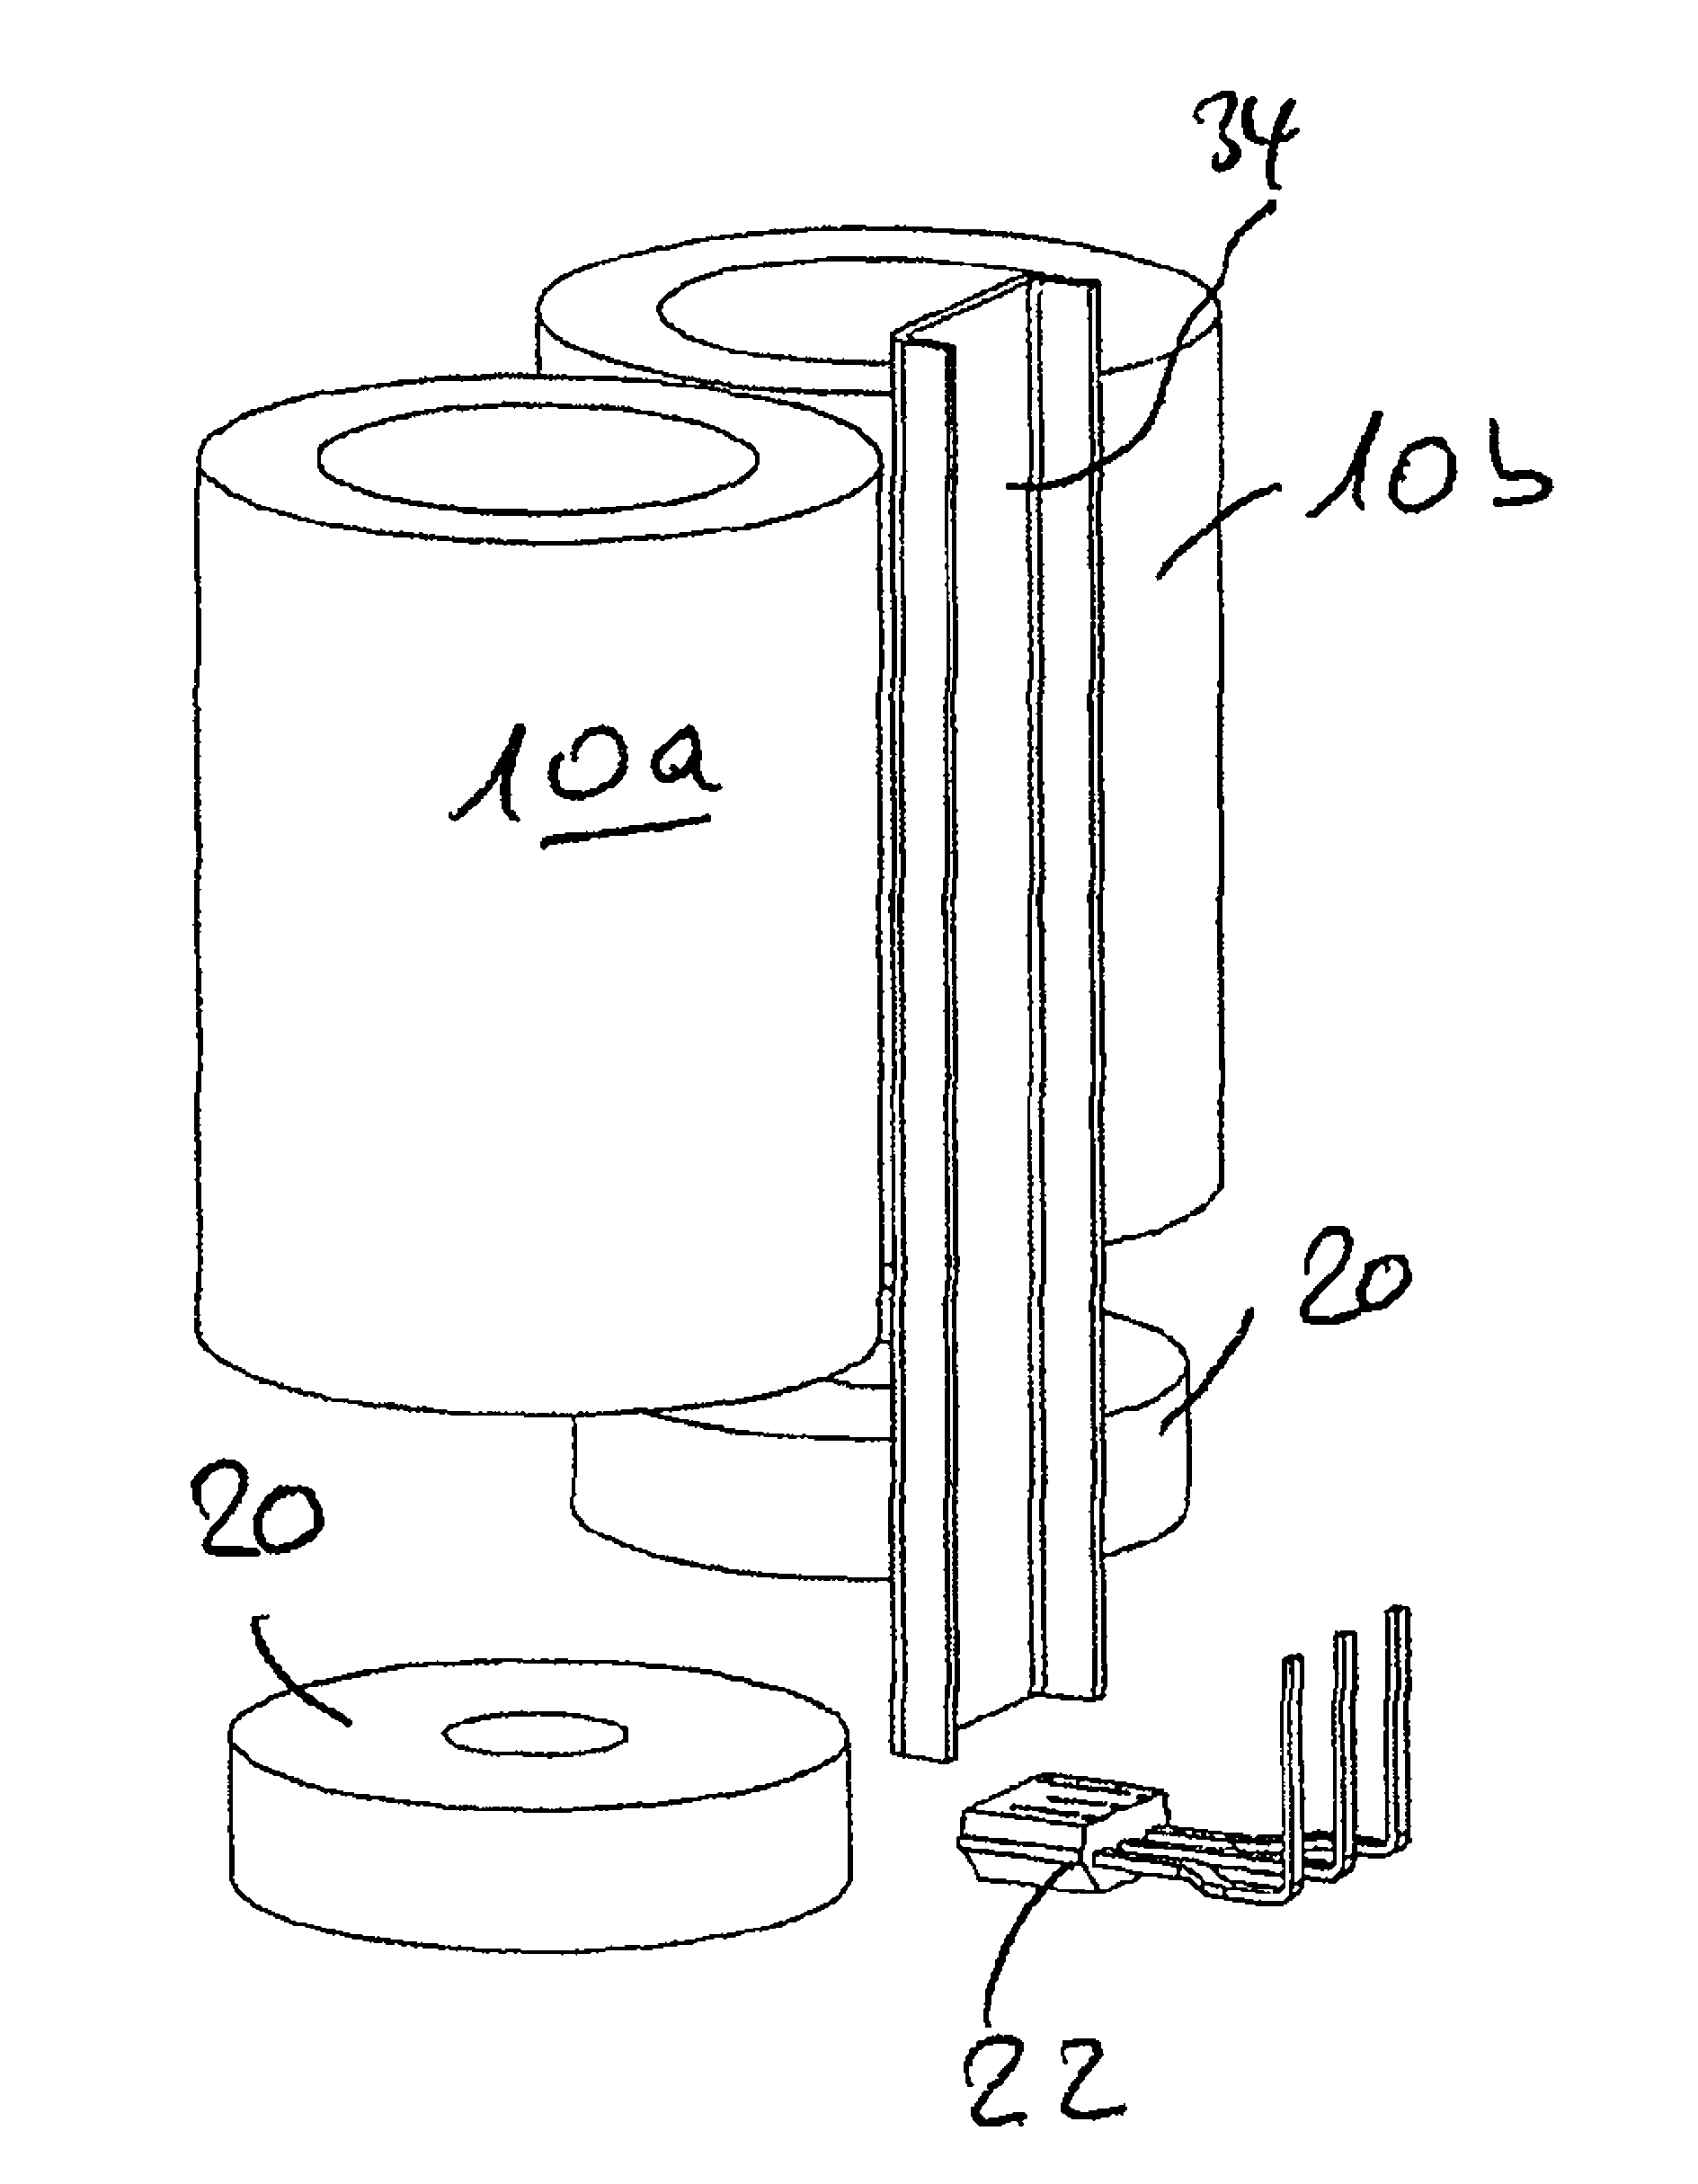 Electromagnetic actuating device